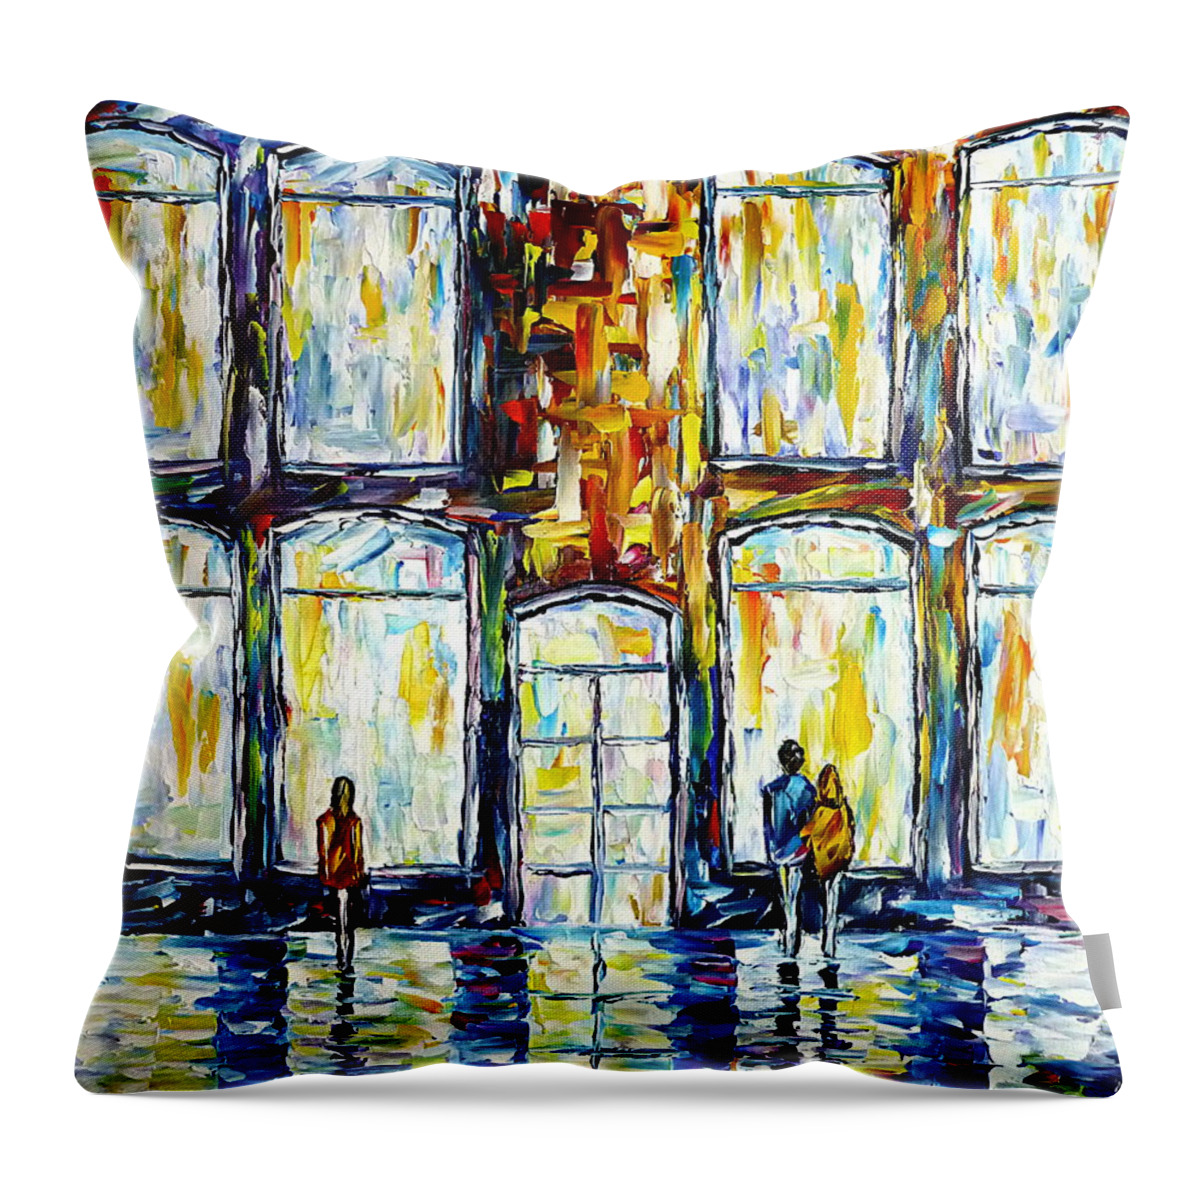 City Life Throw Pillow featuring the painting In Front Of Shop Windows by Mirek Kuzniar